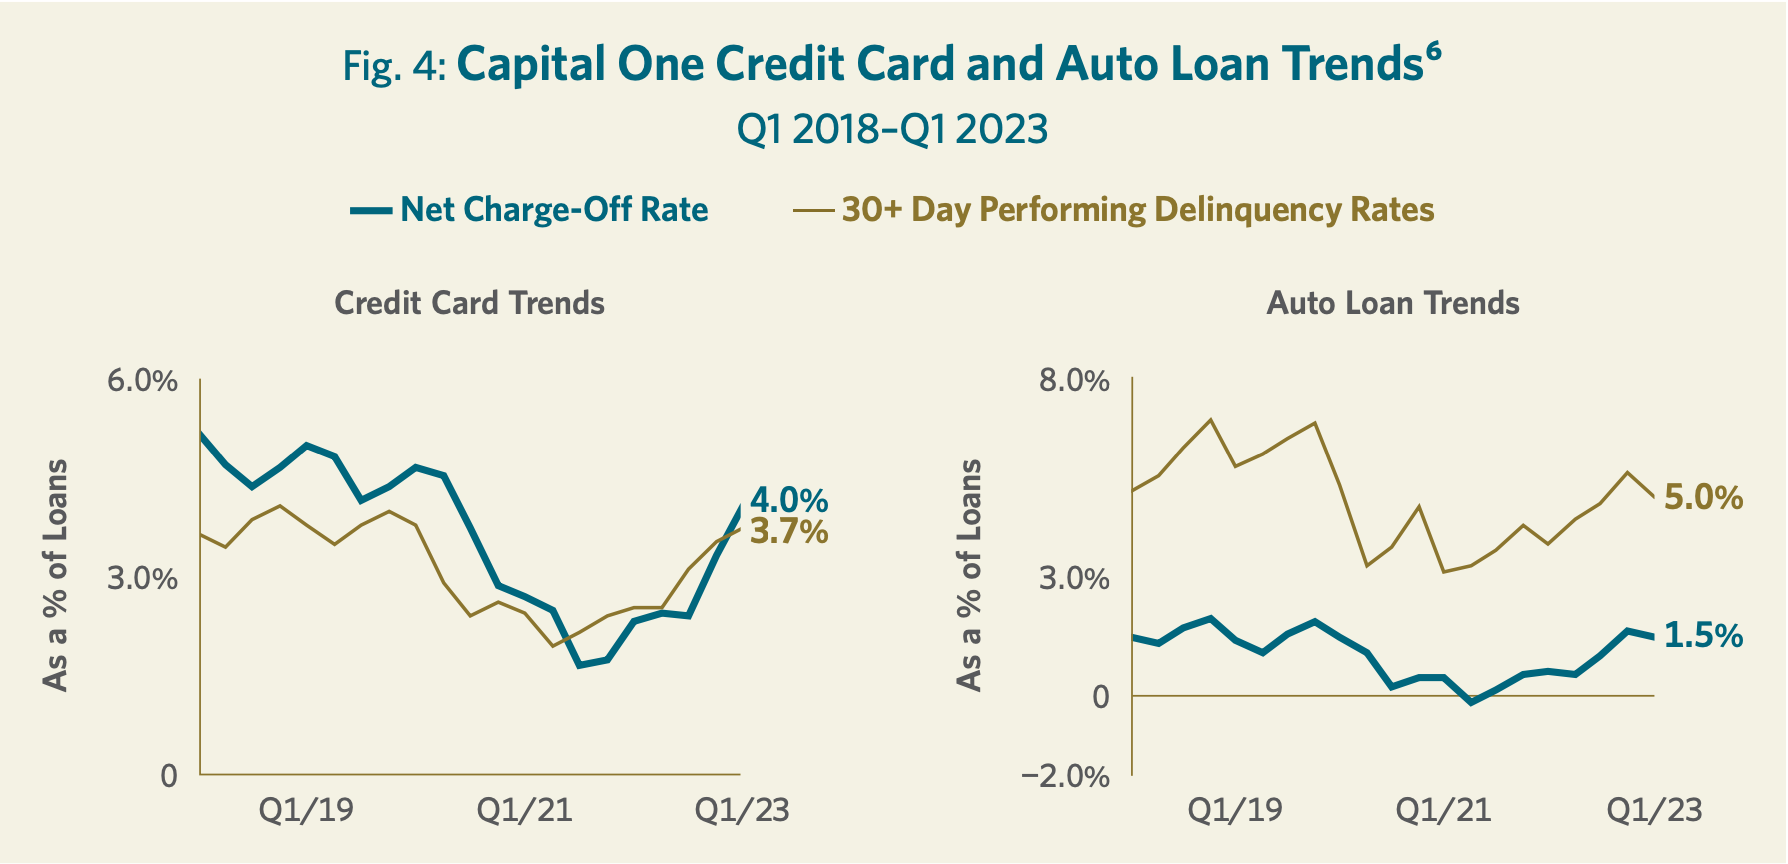 Fig. 4: Capital One Credit Card and Auto Loan Trends